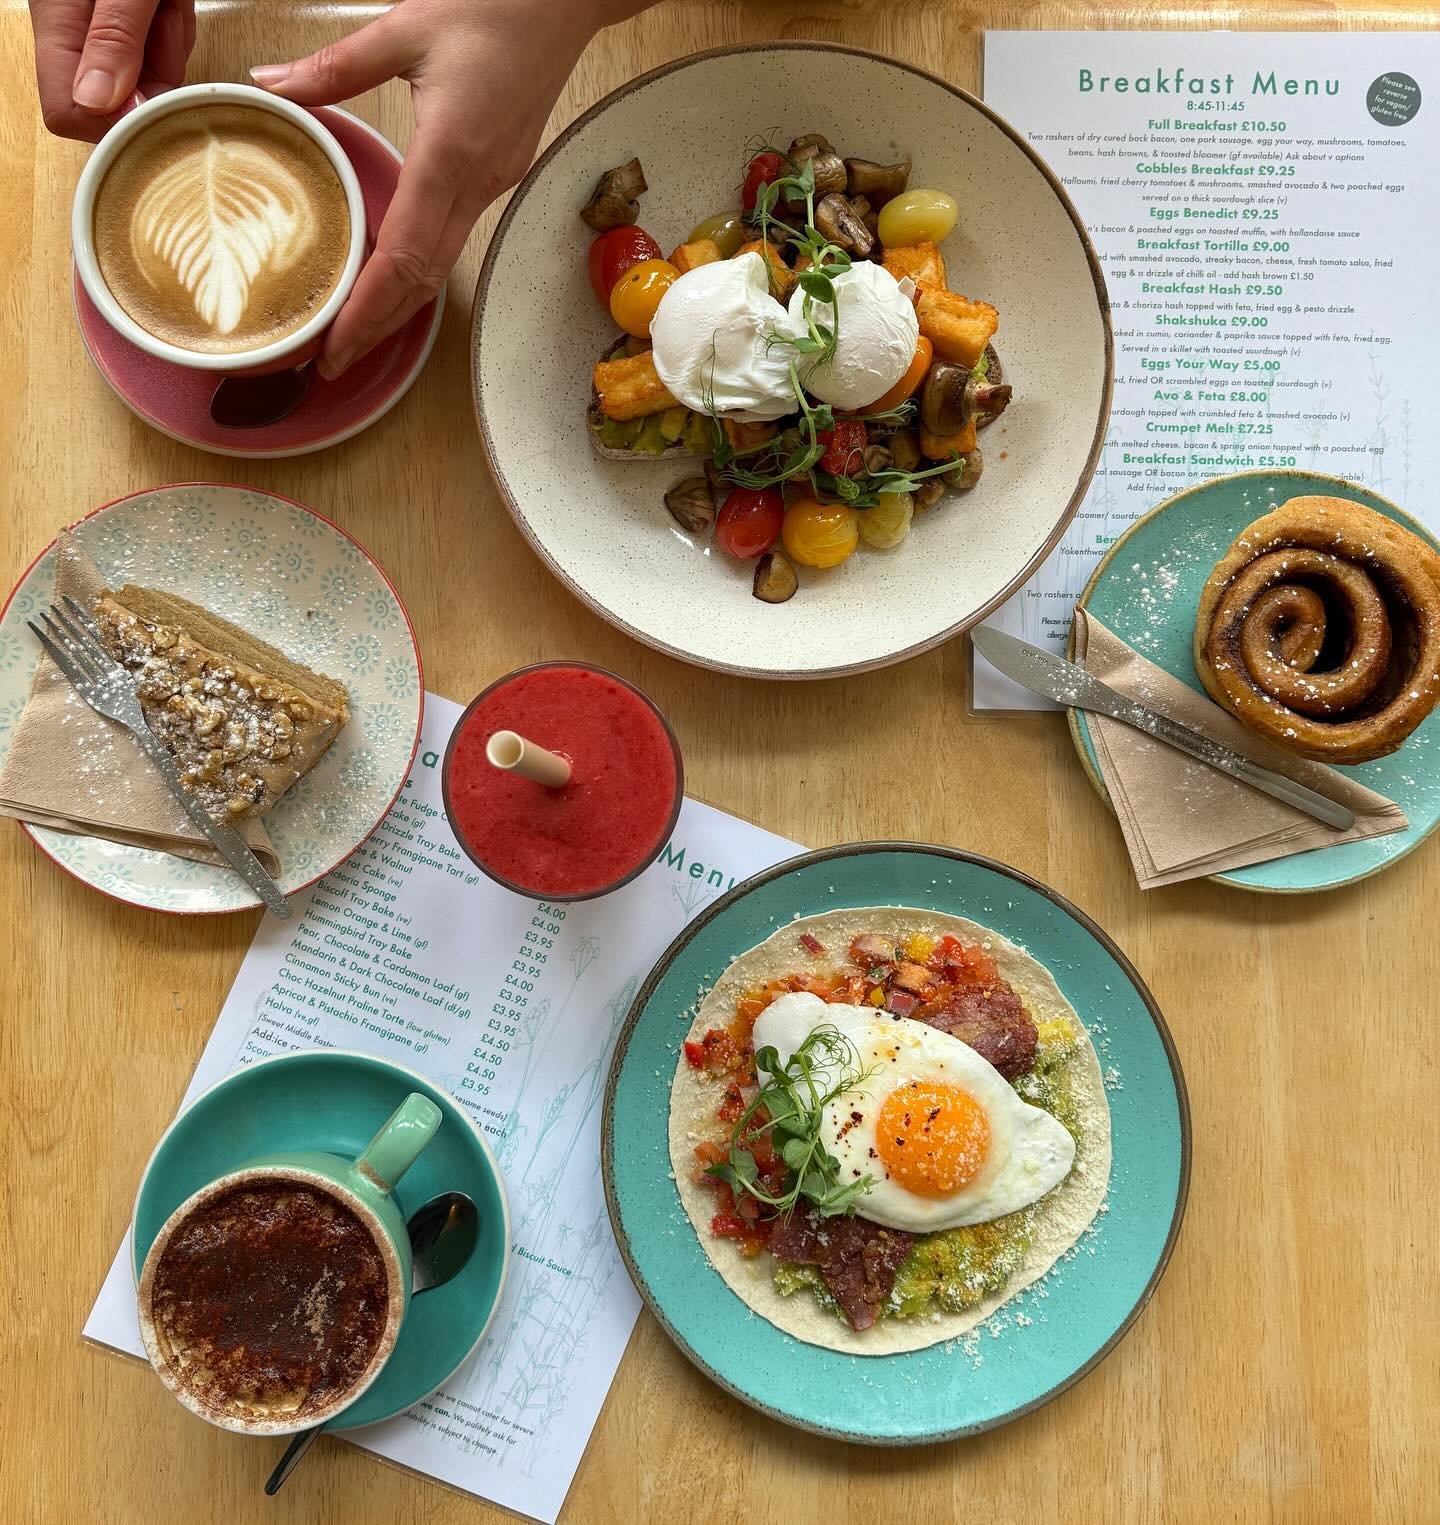 Weekend brunch never looked so good 🌞☕️🍳

To book a table, call us on 01535 958961.

#brunch #breakfast #brunching #brunchtime #cobblesandclay #cobblesandclayhaworth #haworth